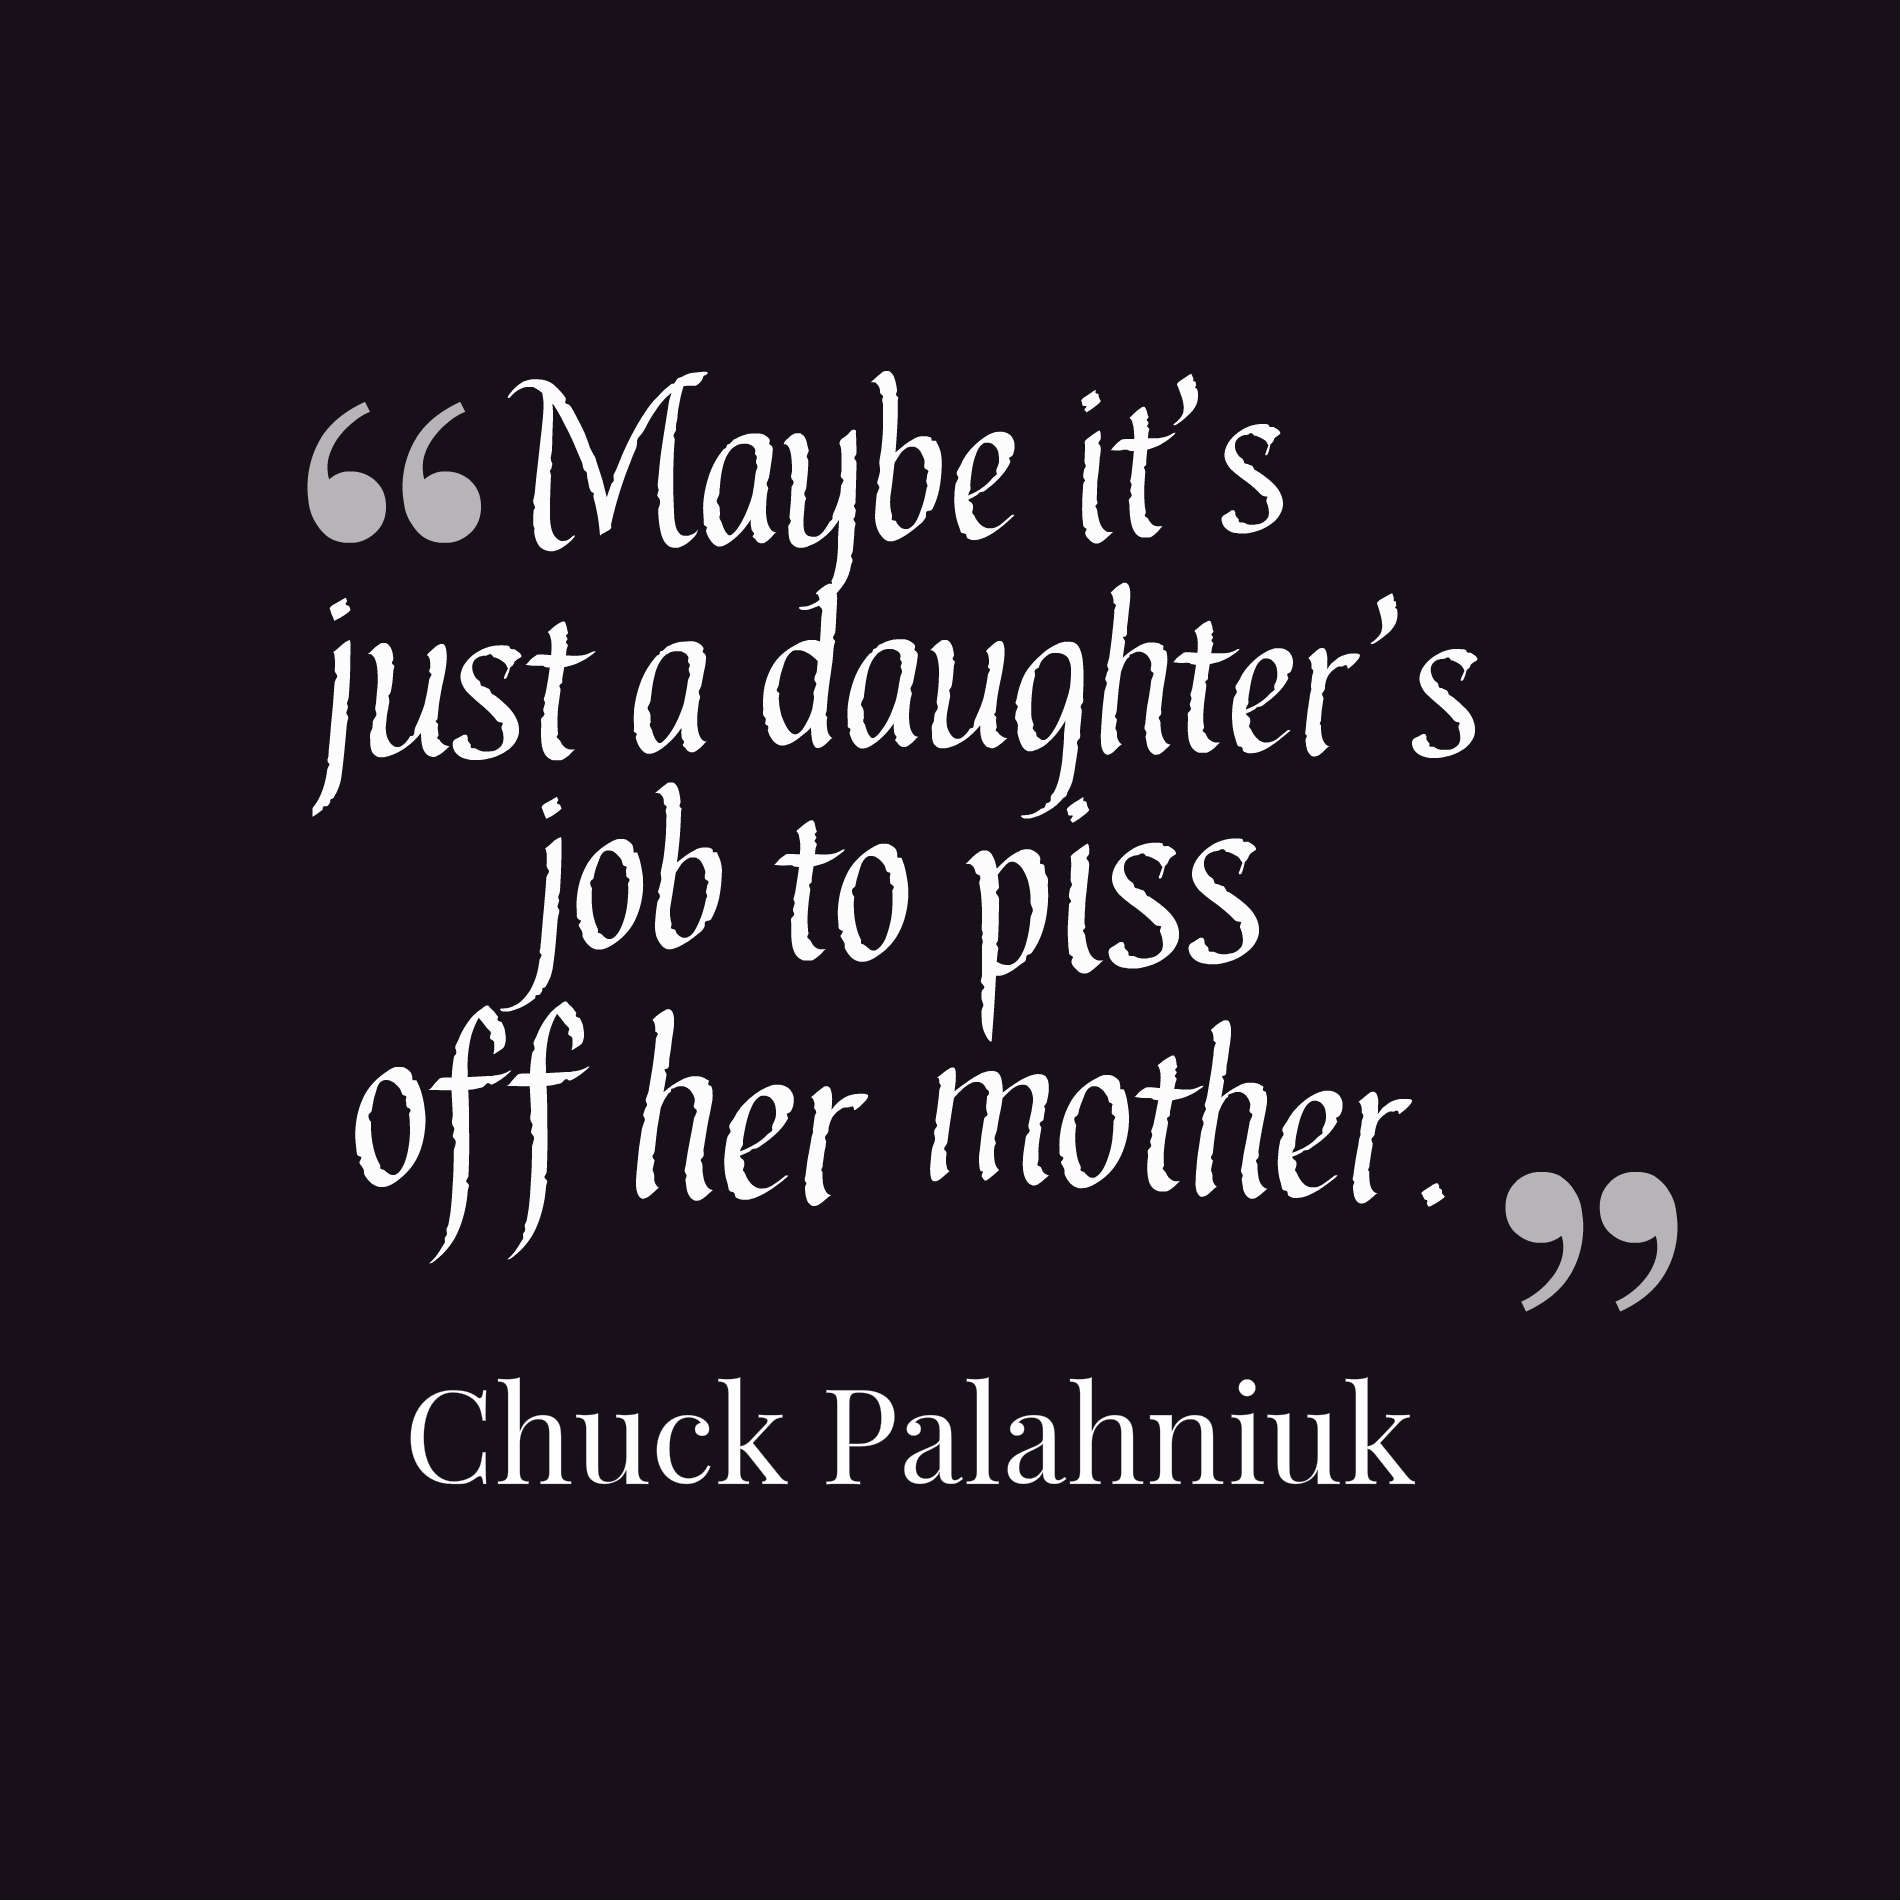 Maybe it’s just a daughter’s job to piss off her mother.